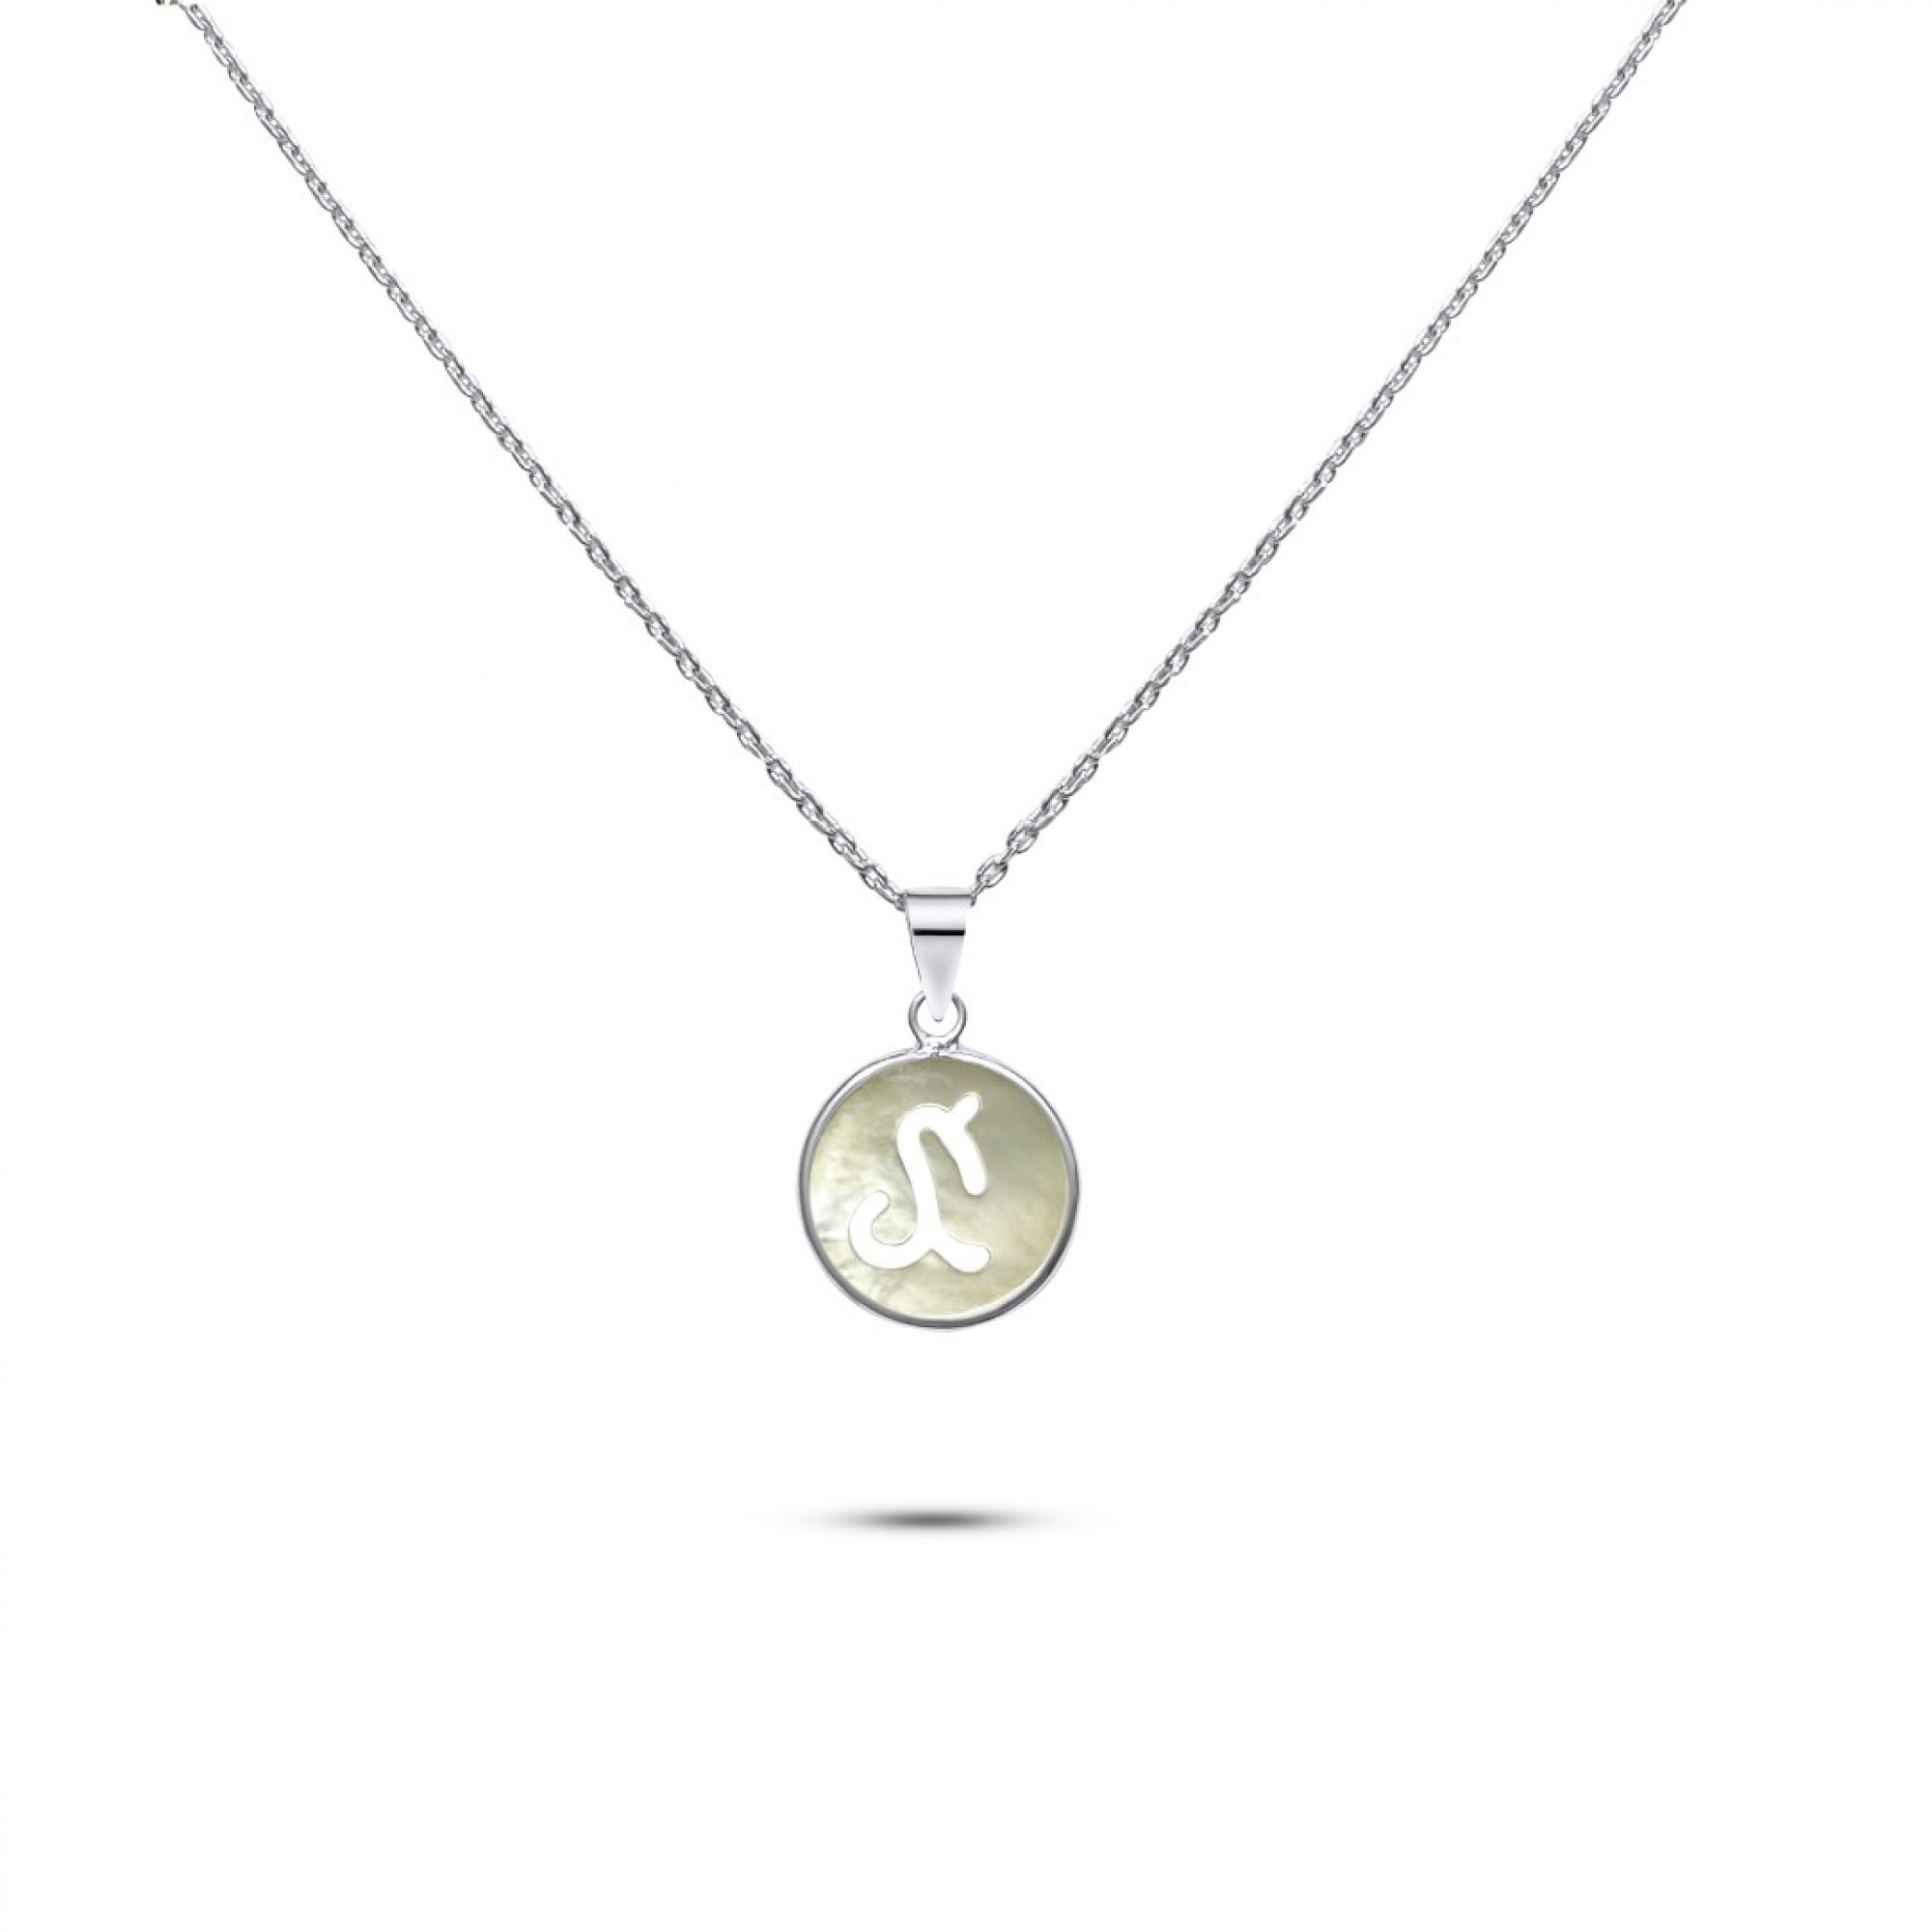 Capricorn sign necklace with mother of pearl